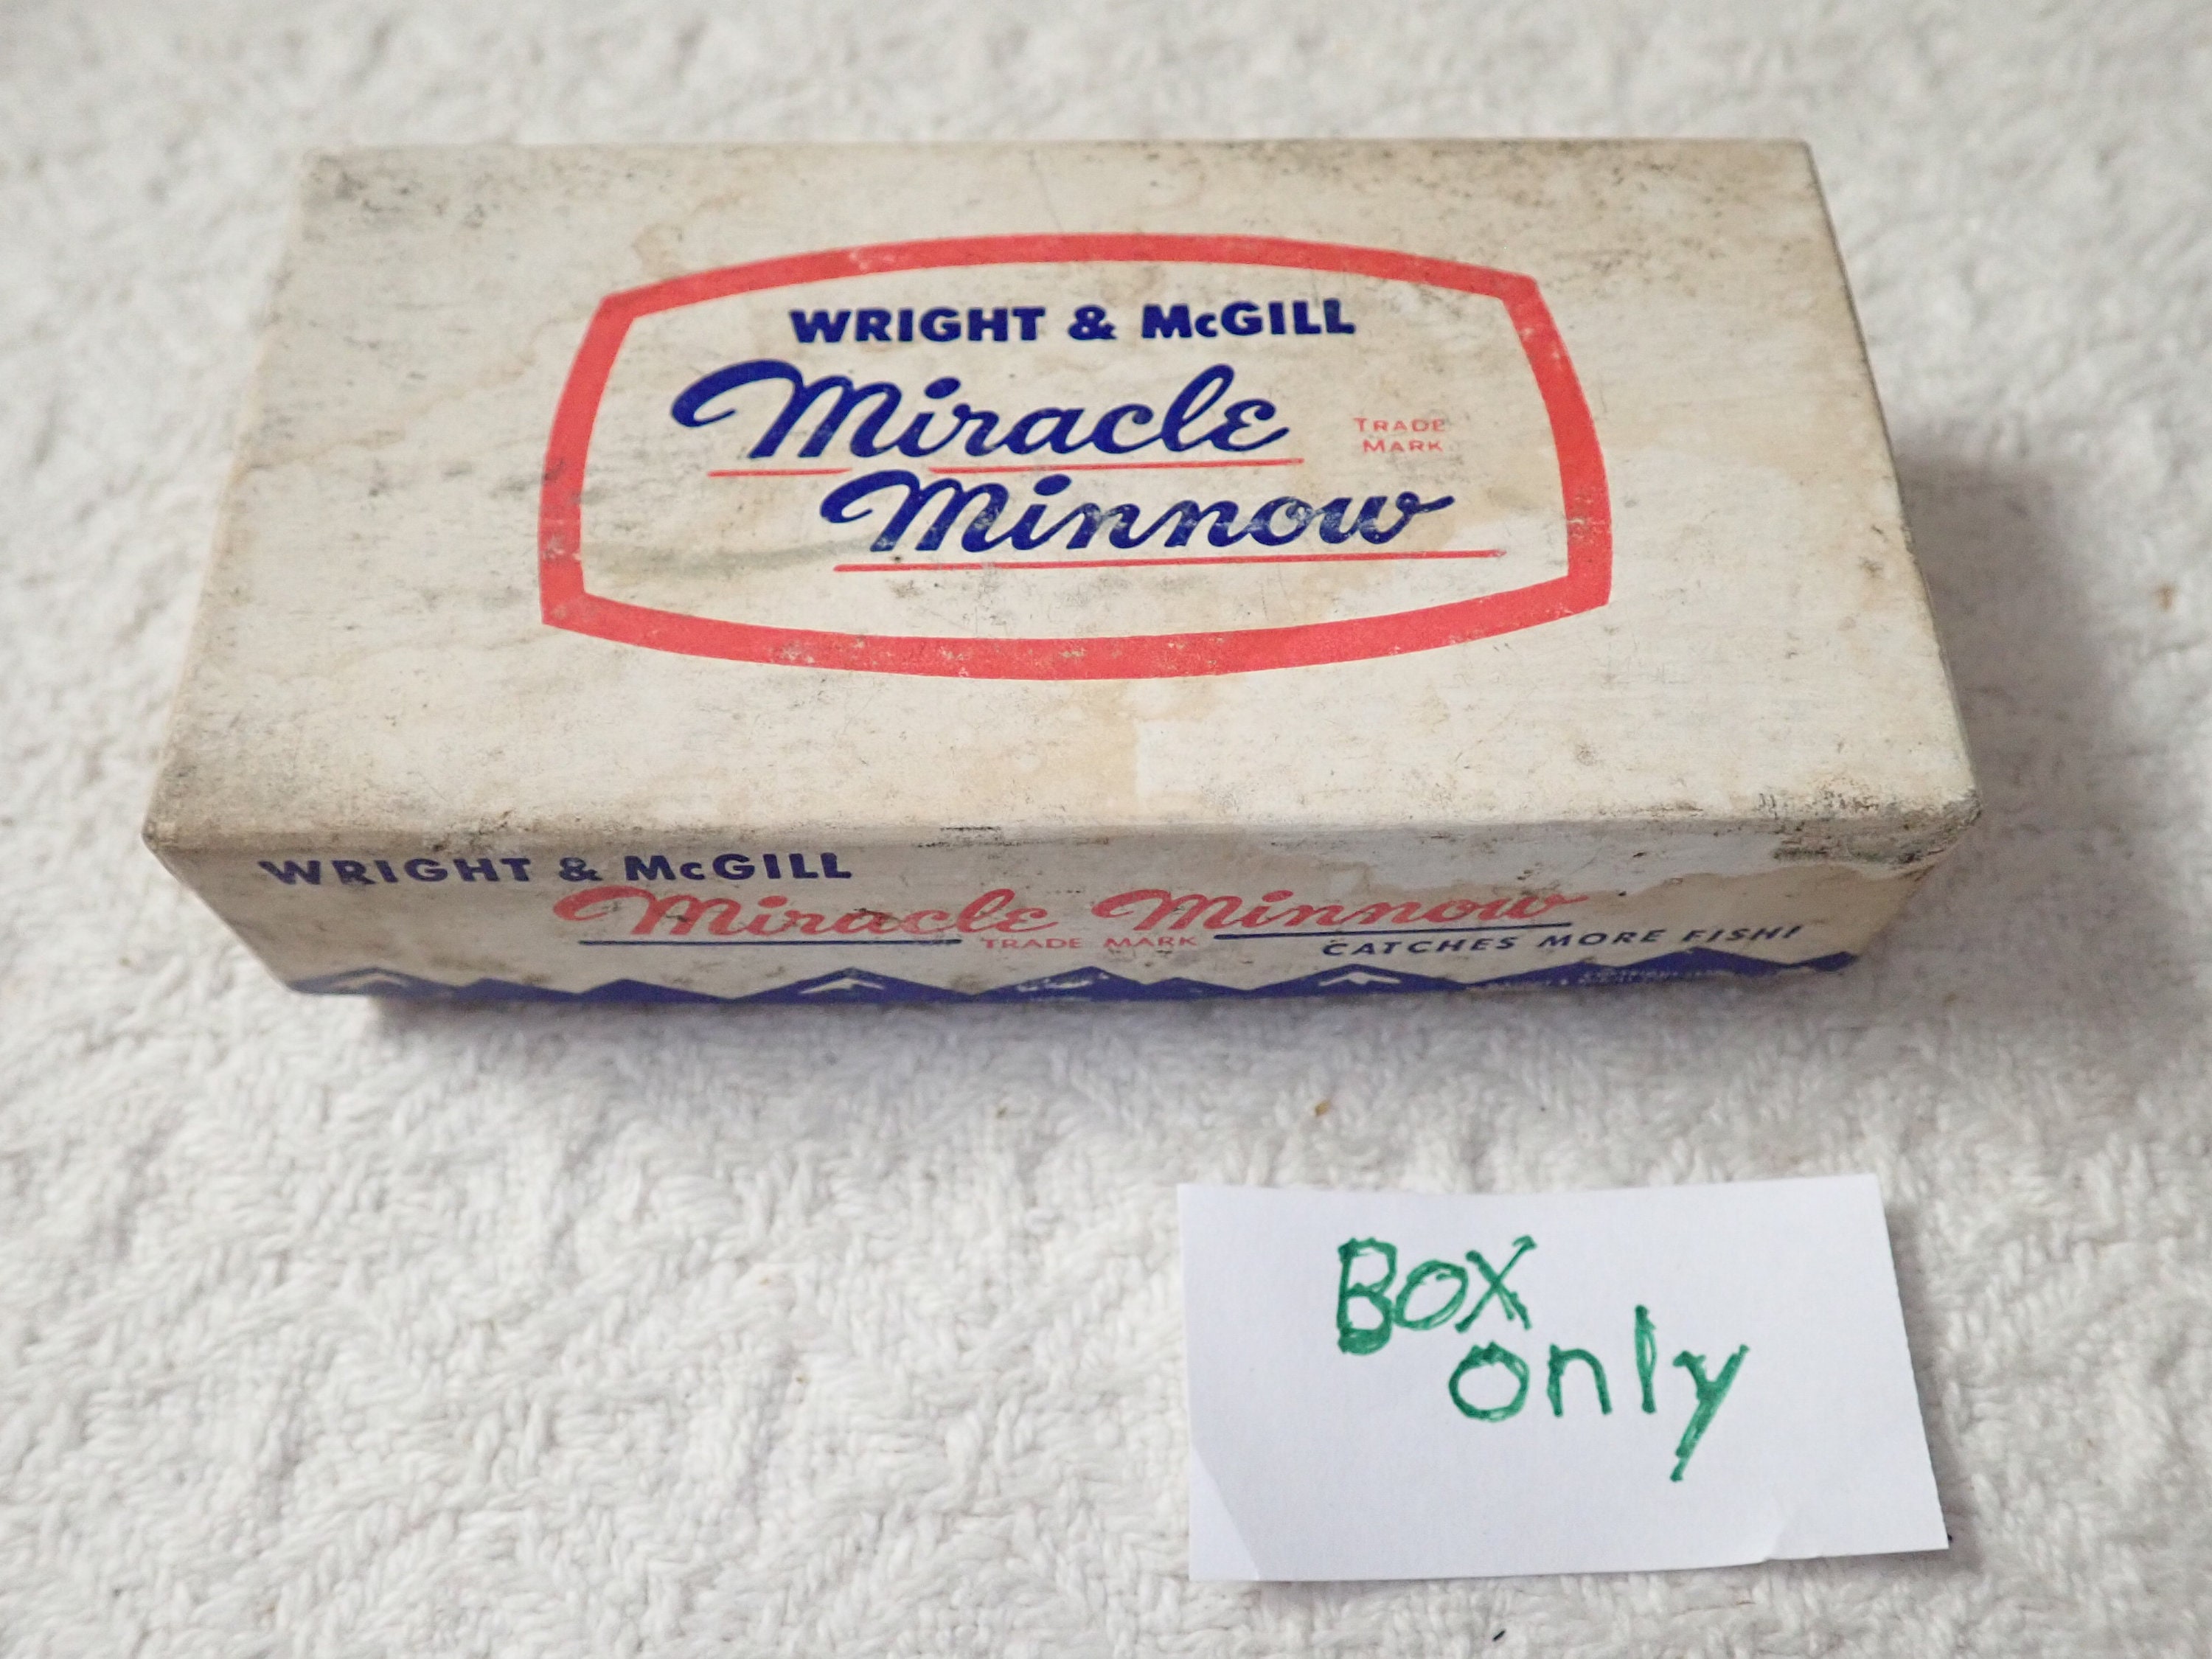 Vintage Wright & Mcgill Miracle Minnow Fishing Lure Box Copyright Date 1938  on Box Box Only -  Canada